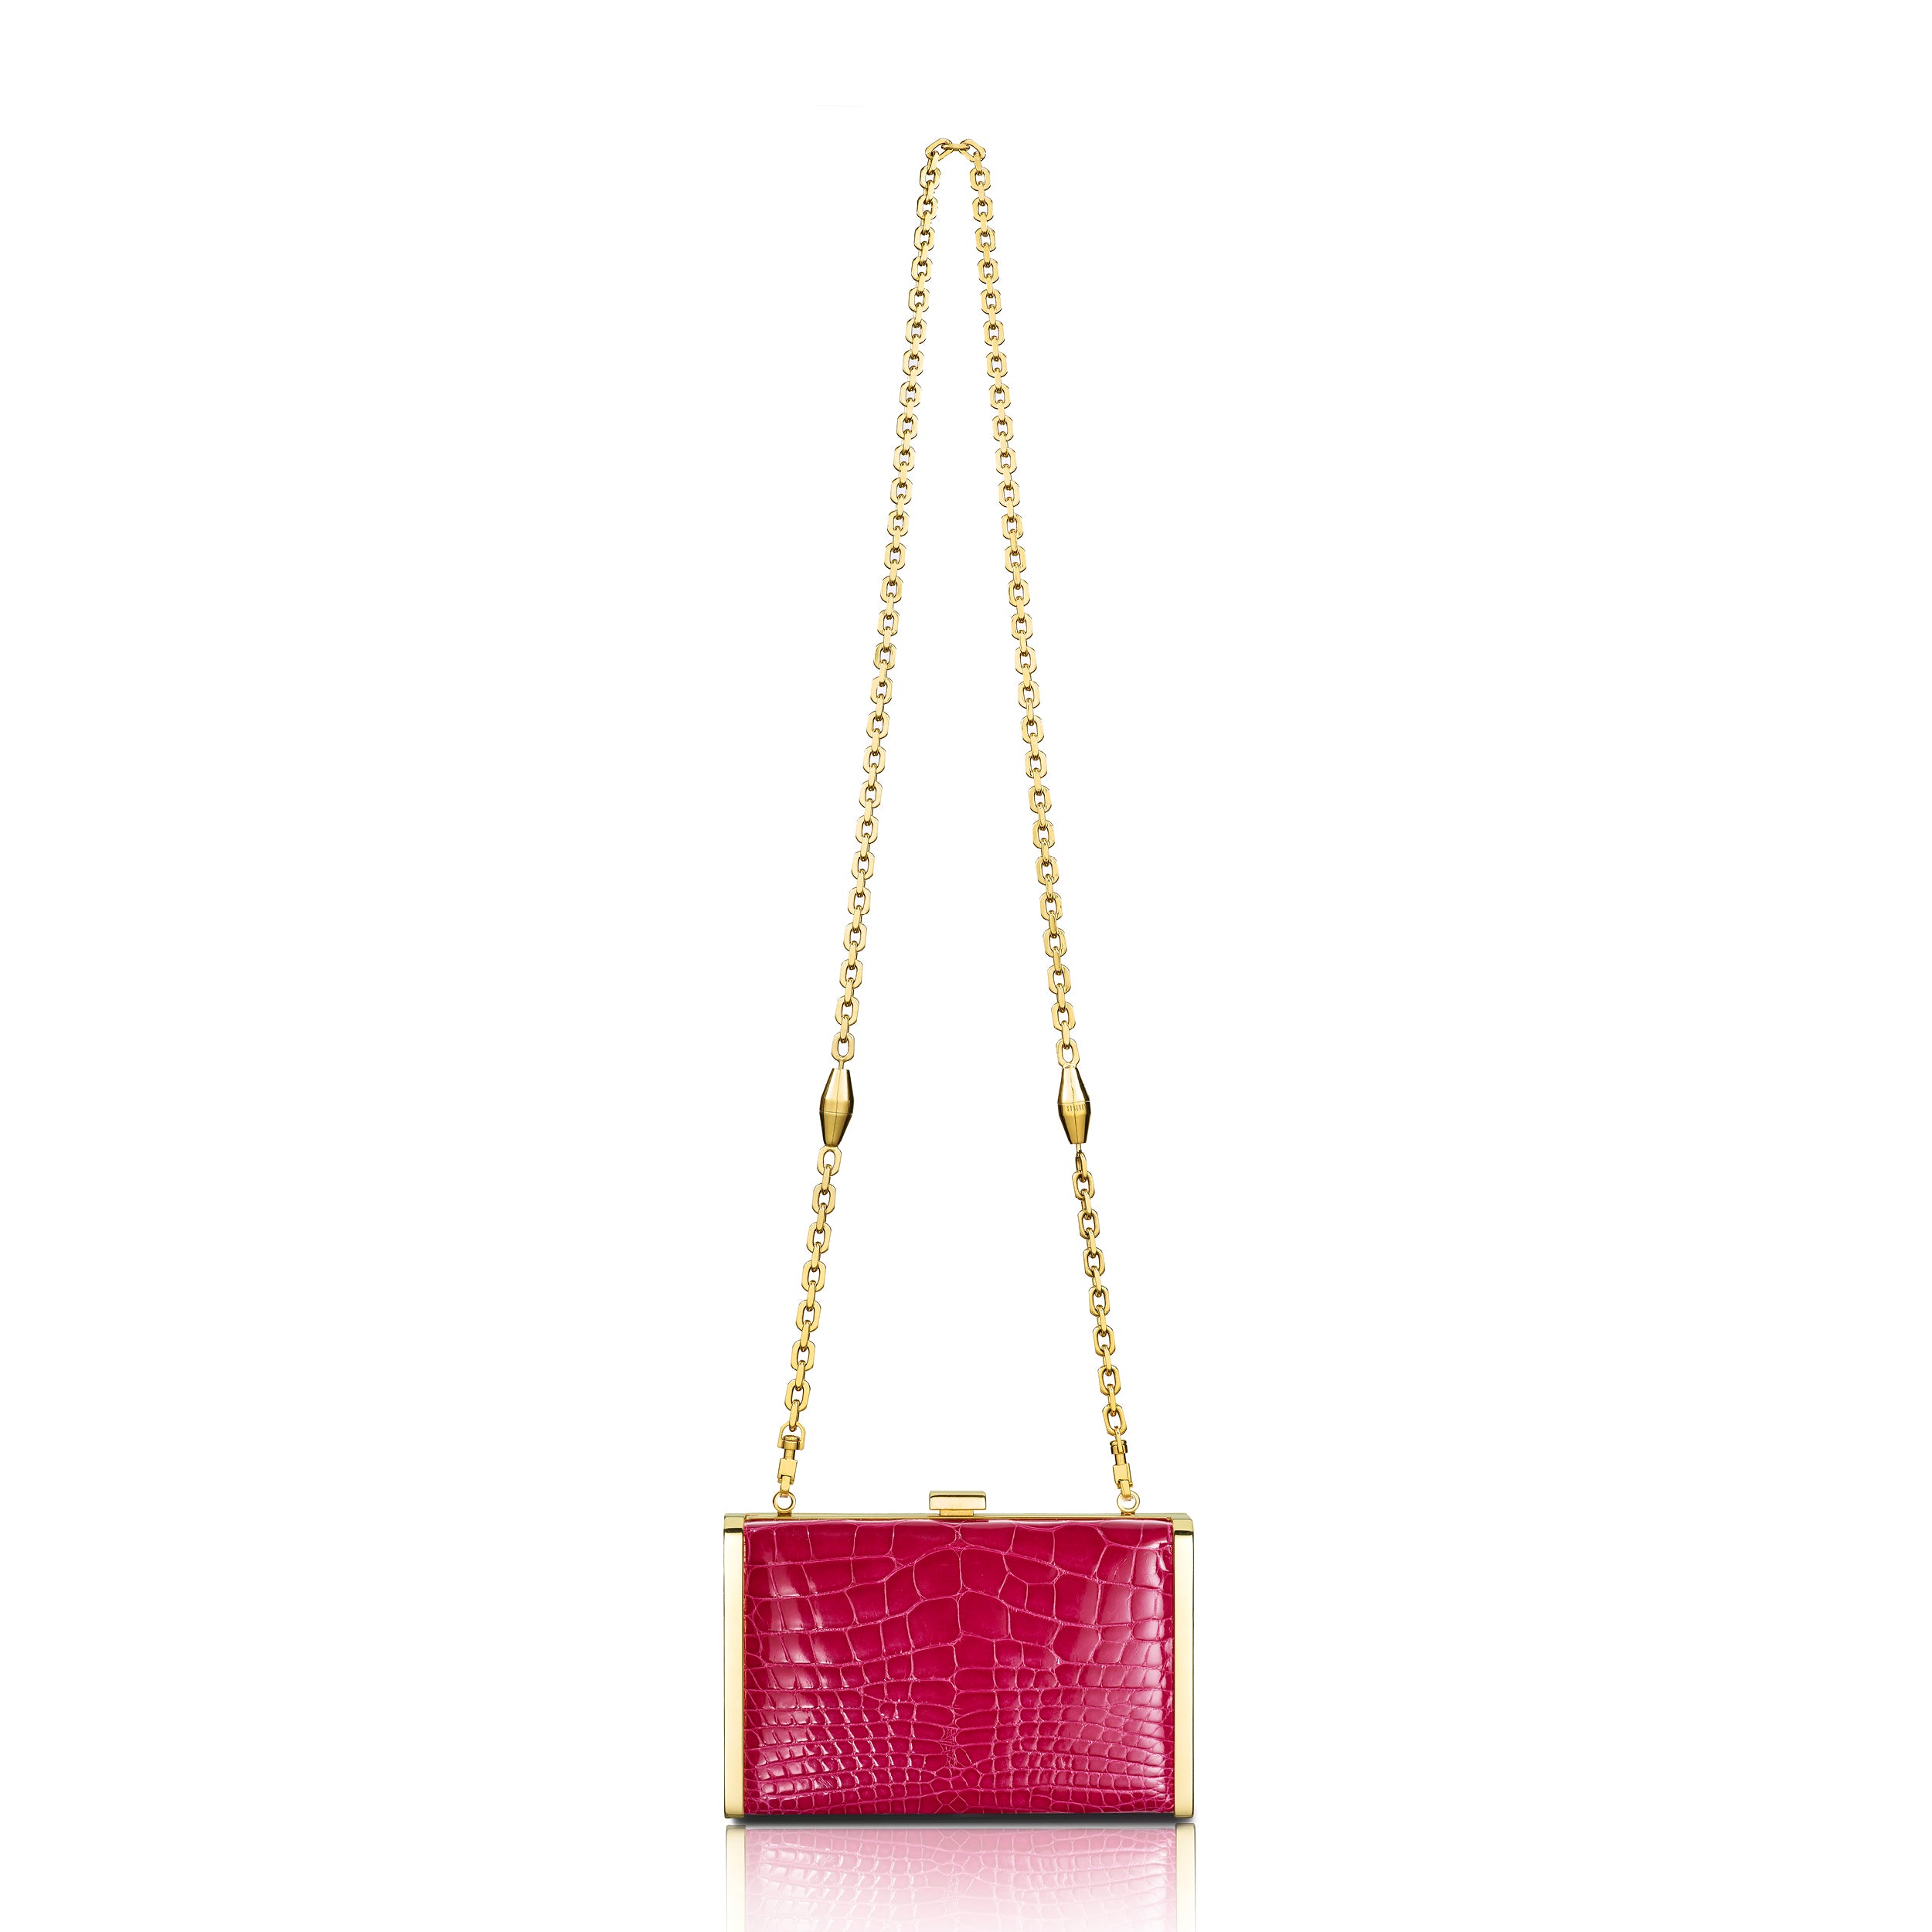 STALVEY Rounded Clutch in Hot Pink Alligator with 24kt Gold Hardware Front View with Chain